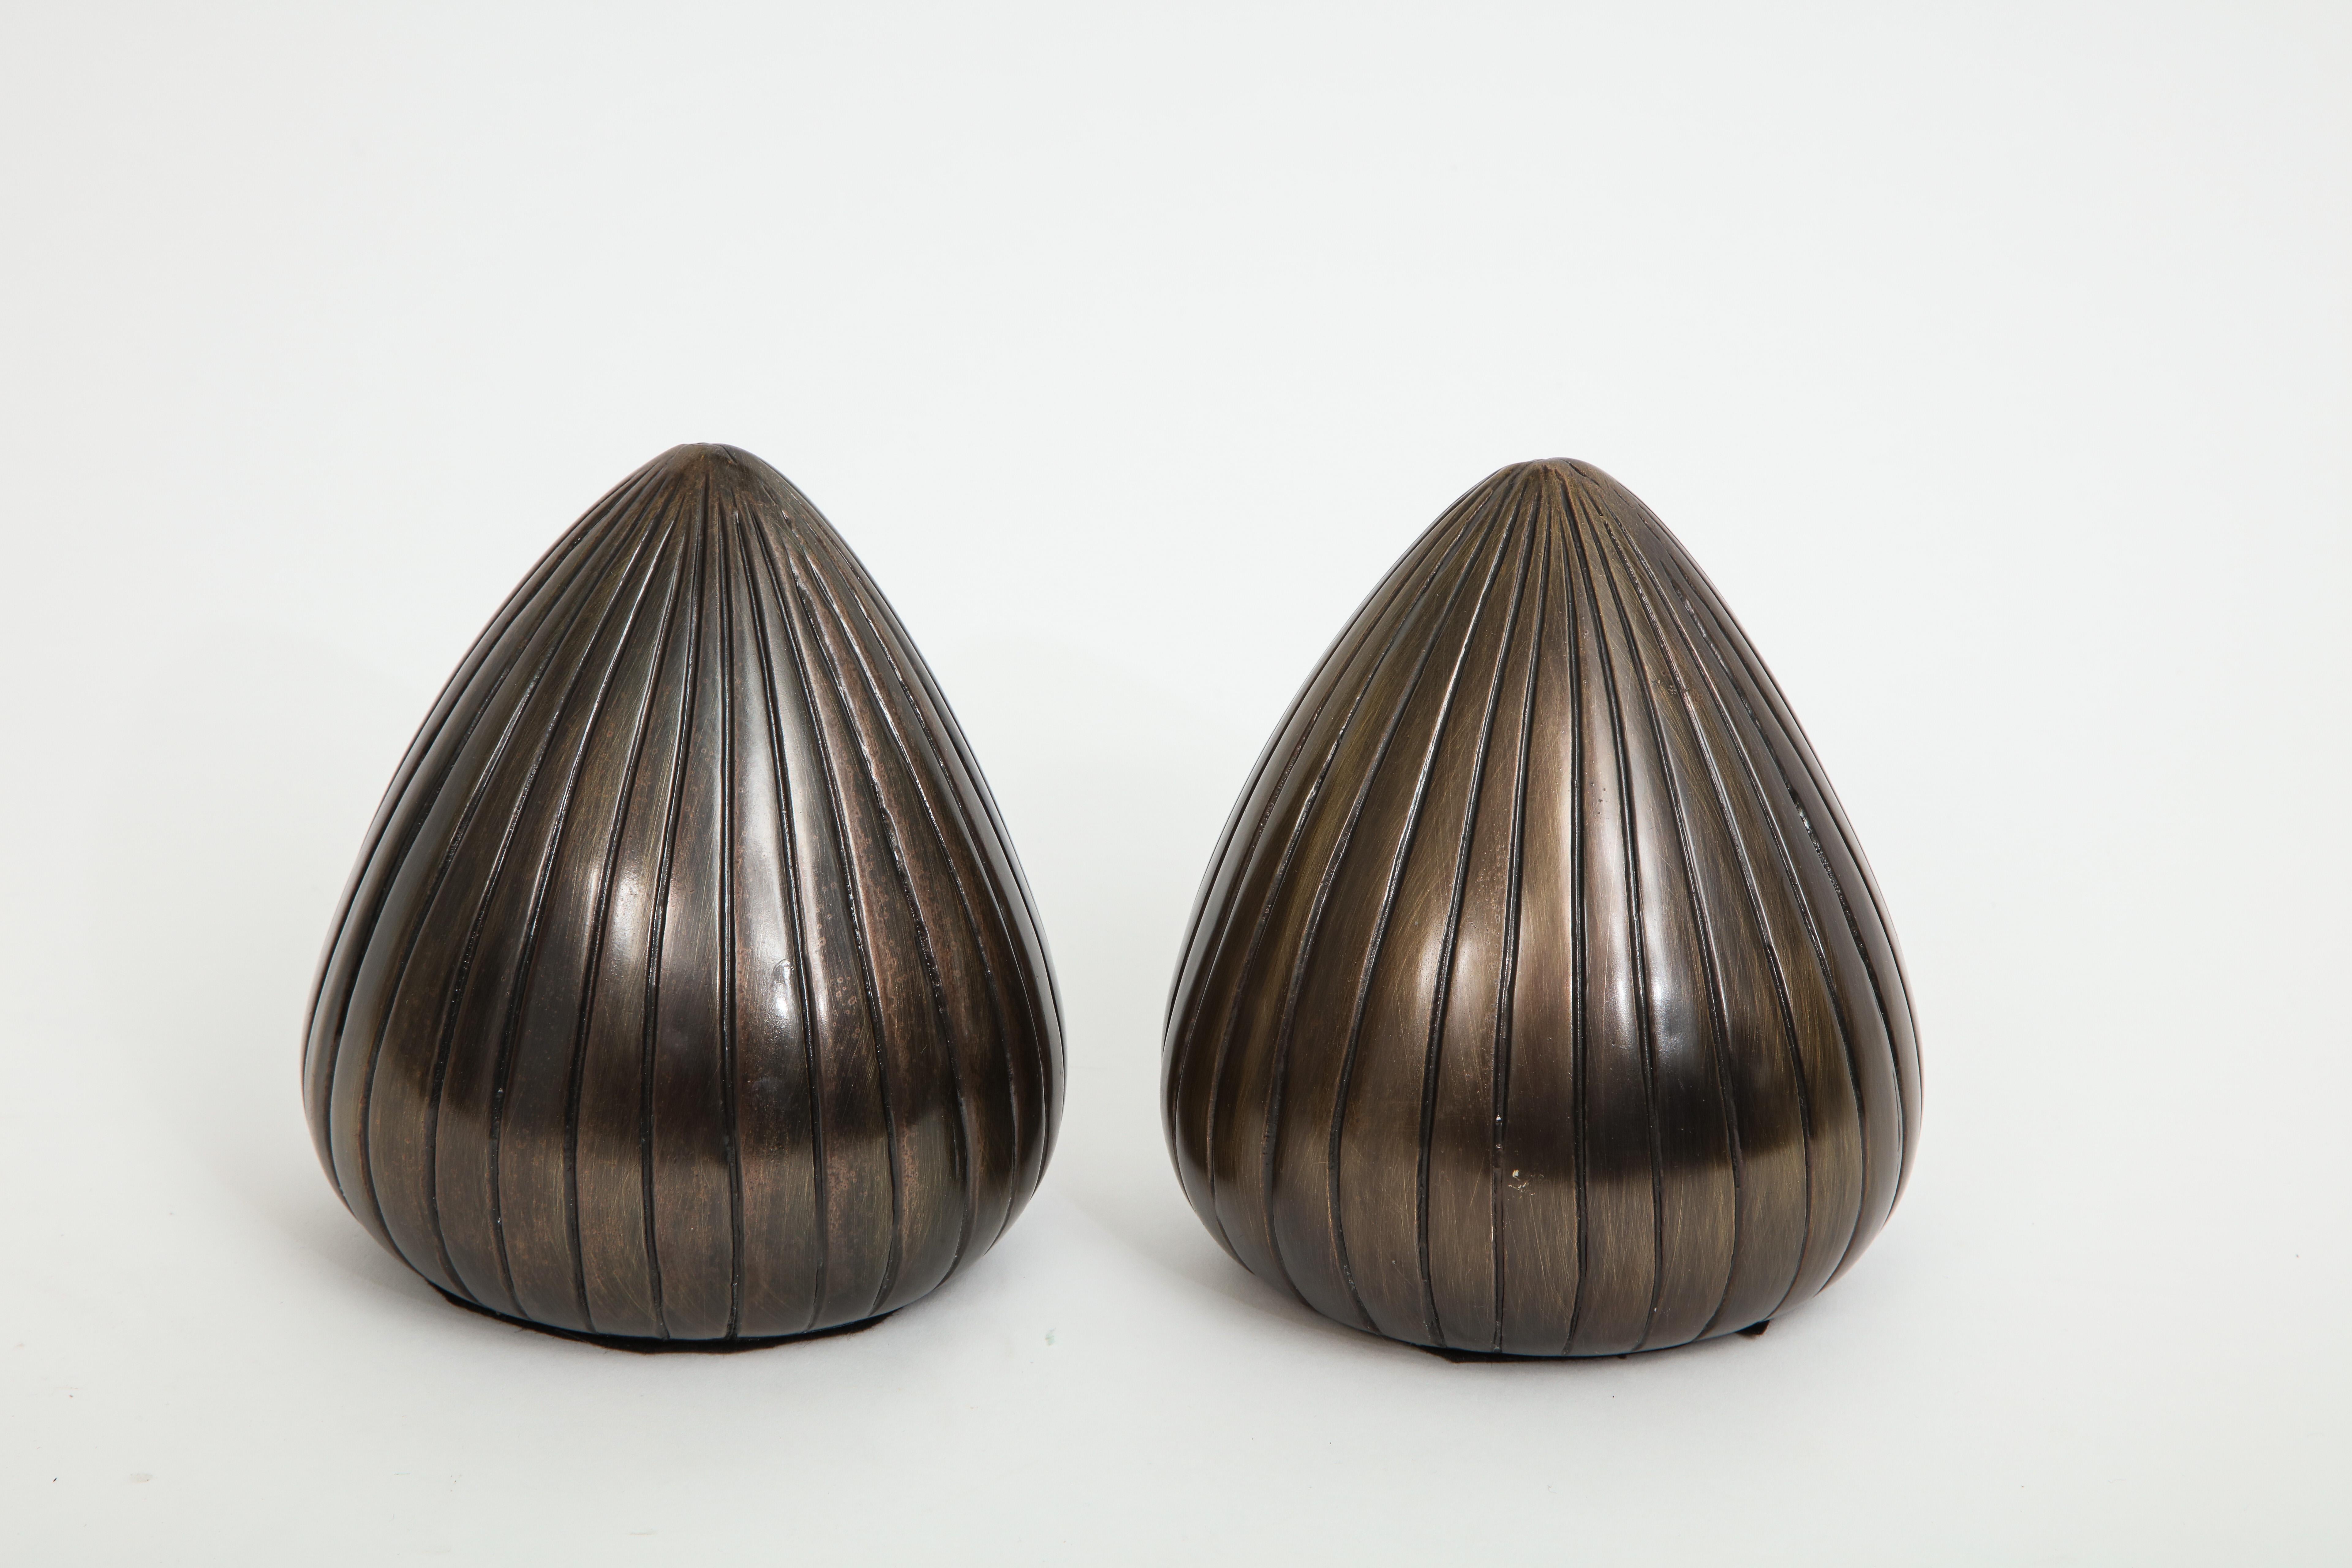 Pair of midcentury orb bookends in a gunmetal/bronze finish by Ben Seibel.